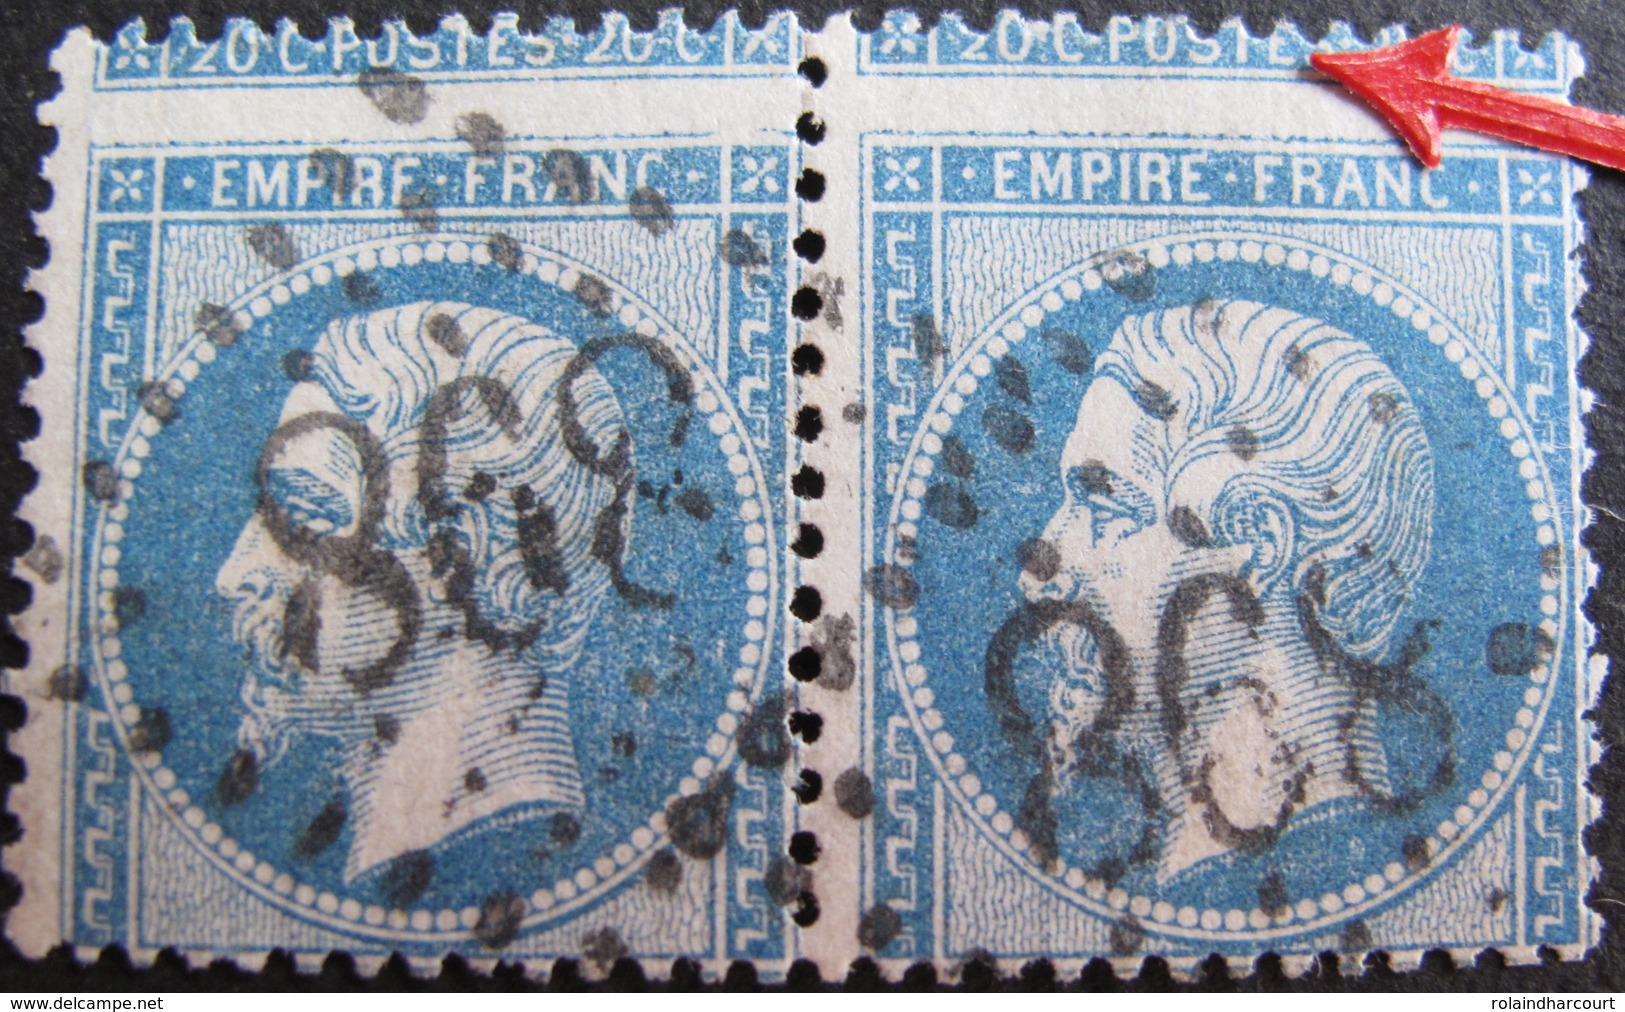 LOT R1749/22 - NAPOLEON III (PAIRE) N°22 - GC 898 : CHARLEVILLE (Ardennes)  ☛ TRES BEAU PIQUAGE DECALE - 1862 Napoleone III